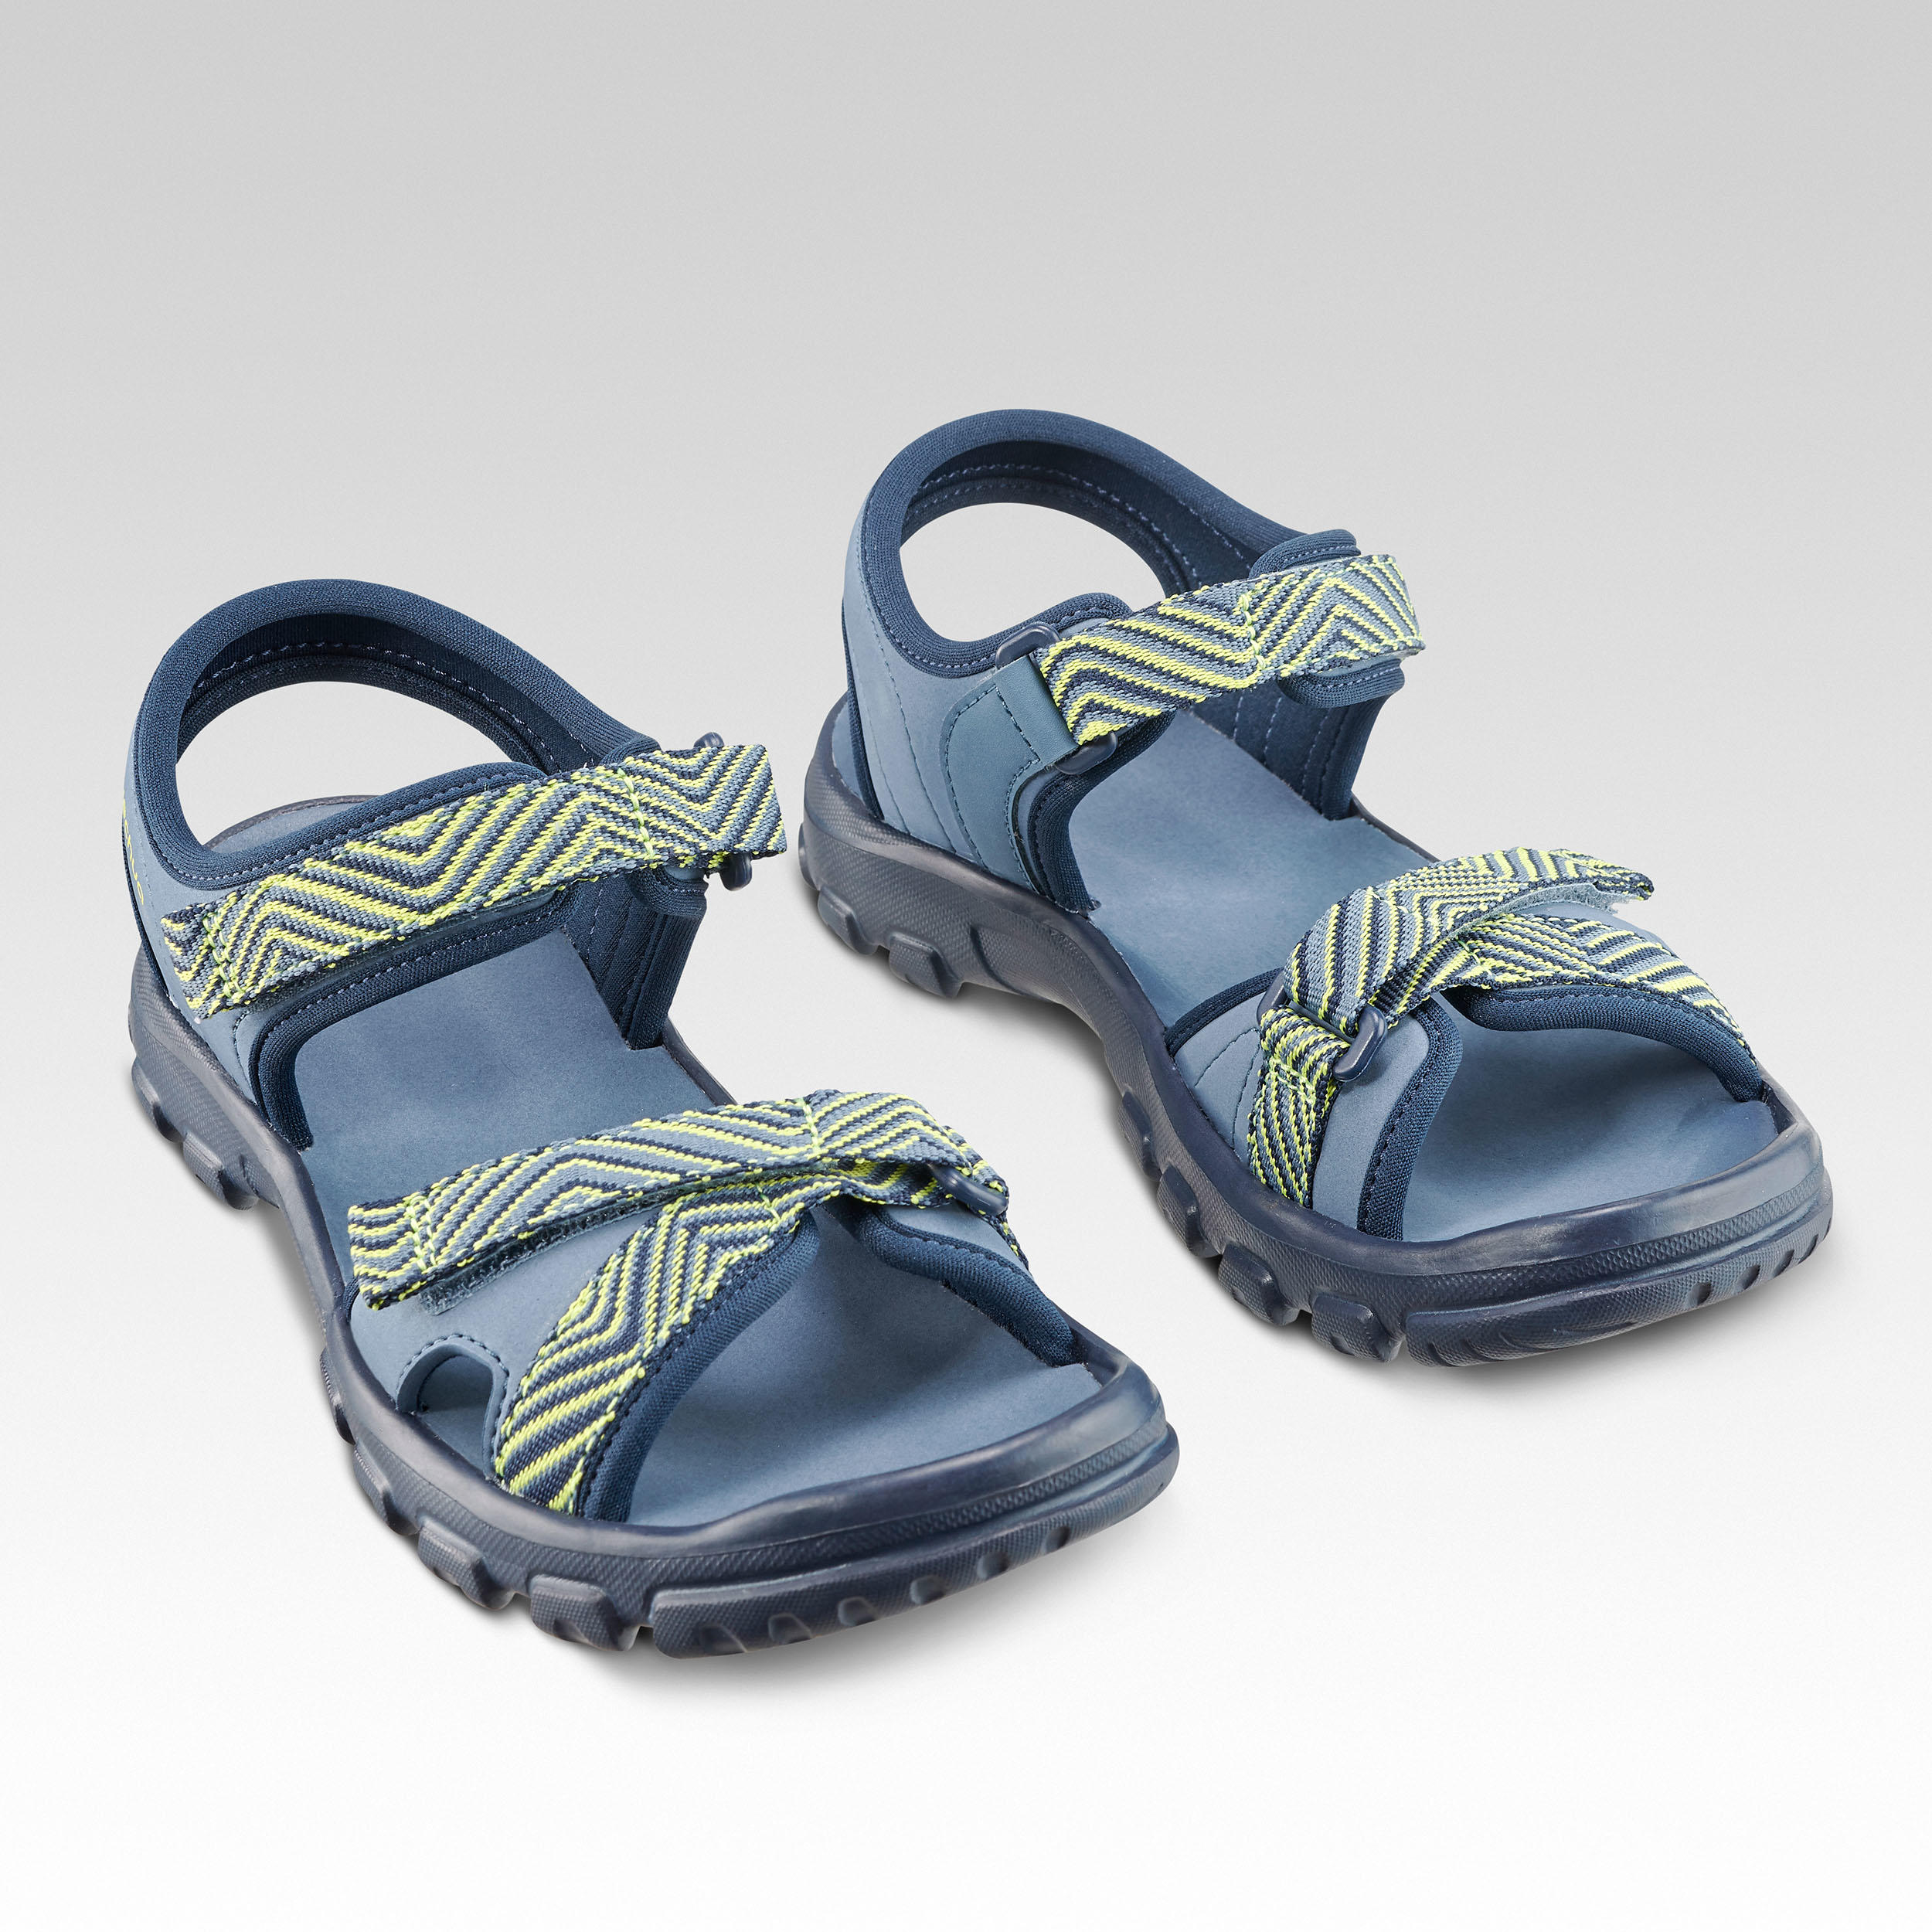 Girls' Outdoor & Hiking Sandals | Shoe Carnival